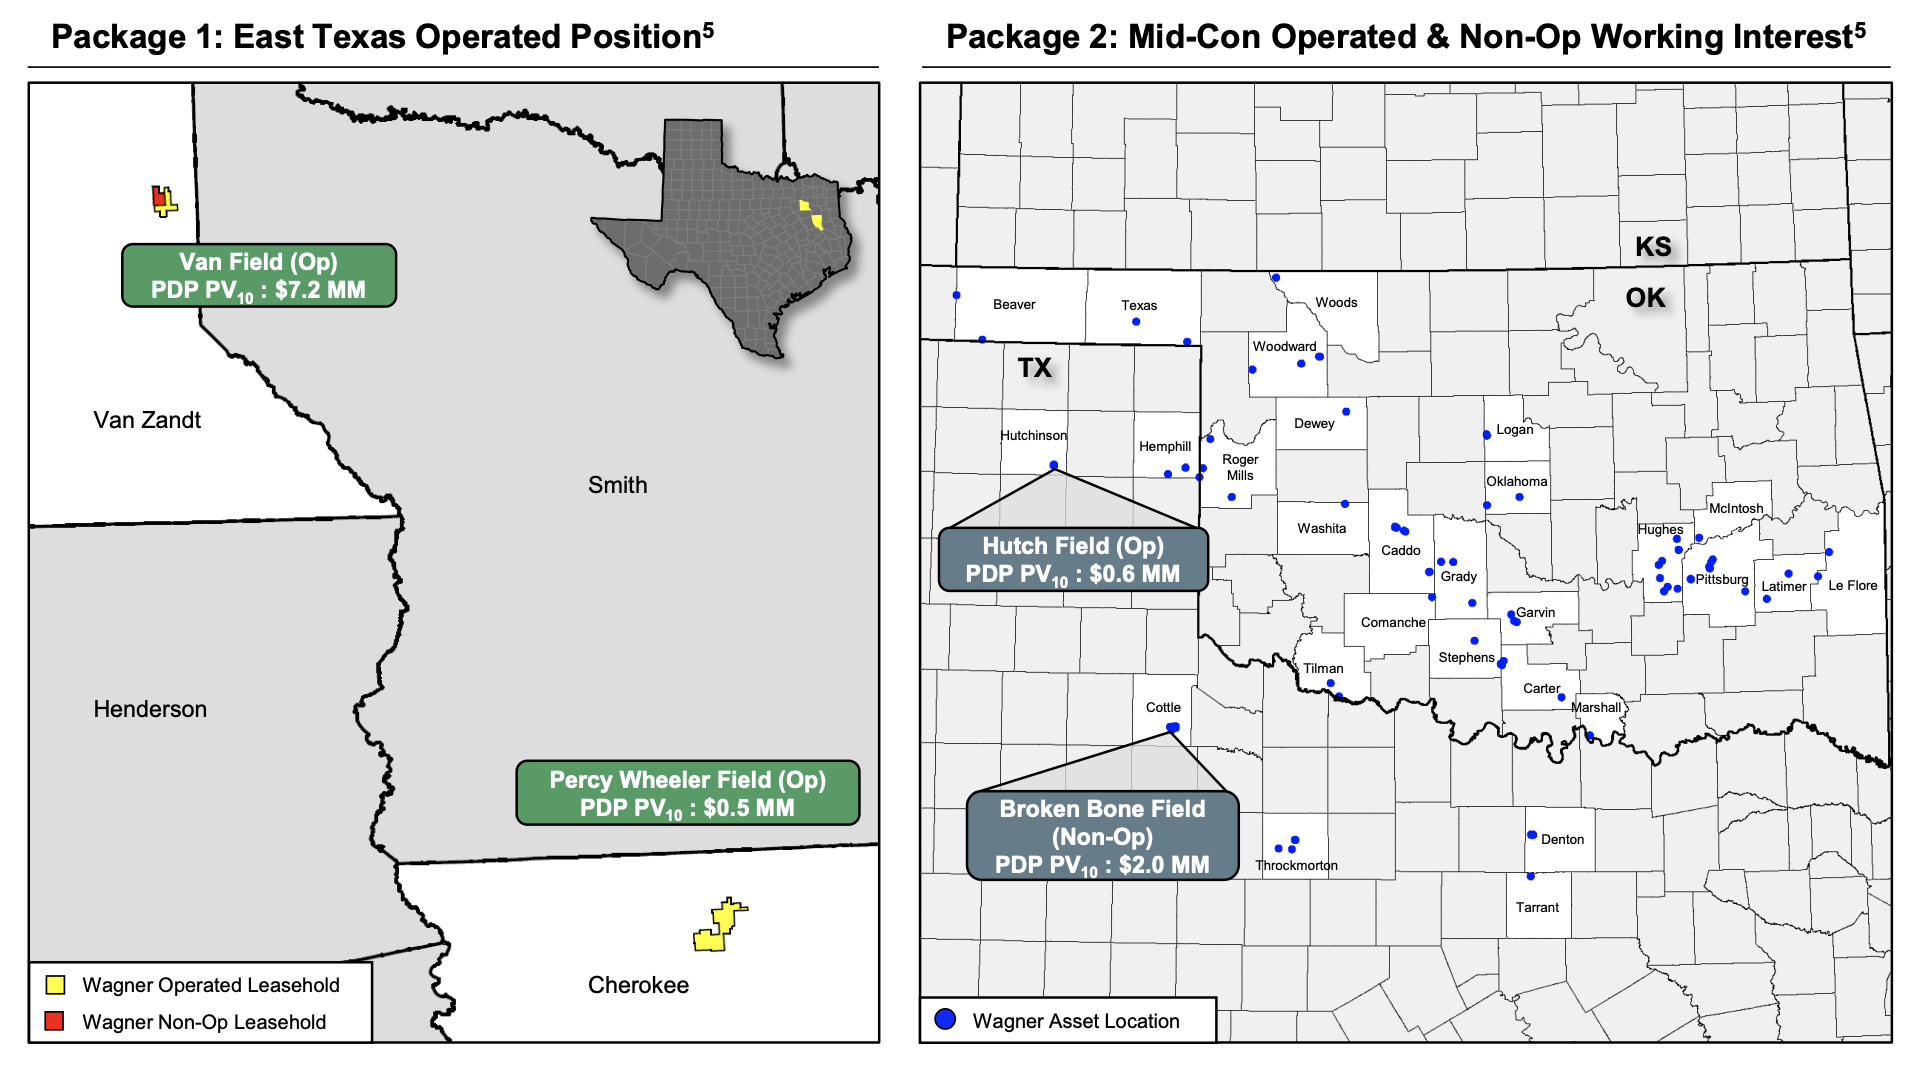 Marketed: Wagner Oil East Texas, Midcontinent Properties